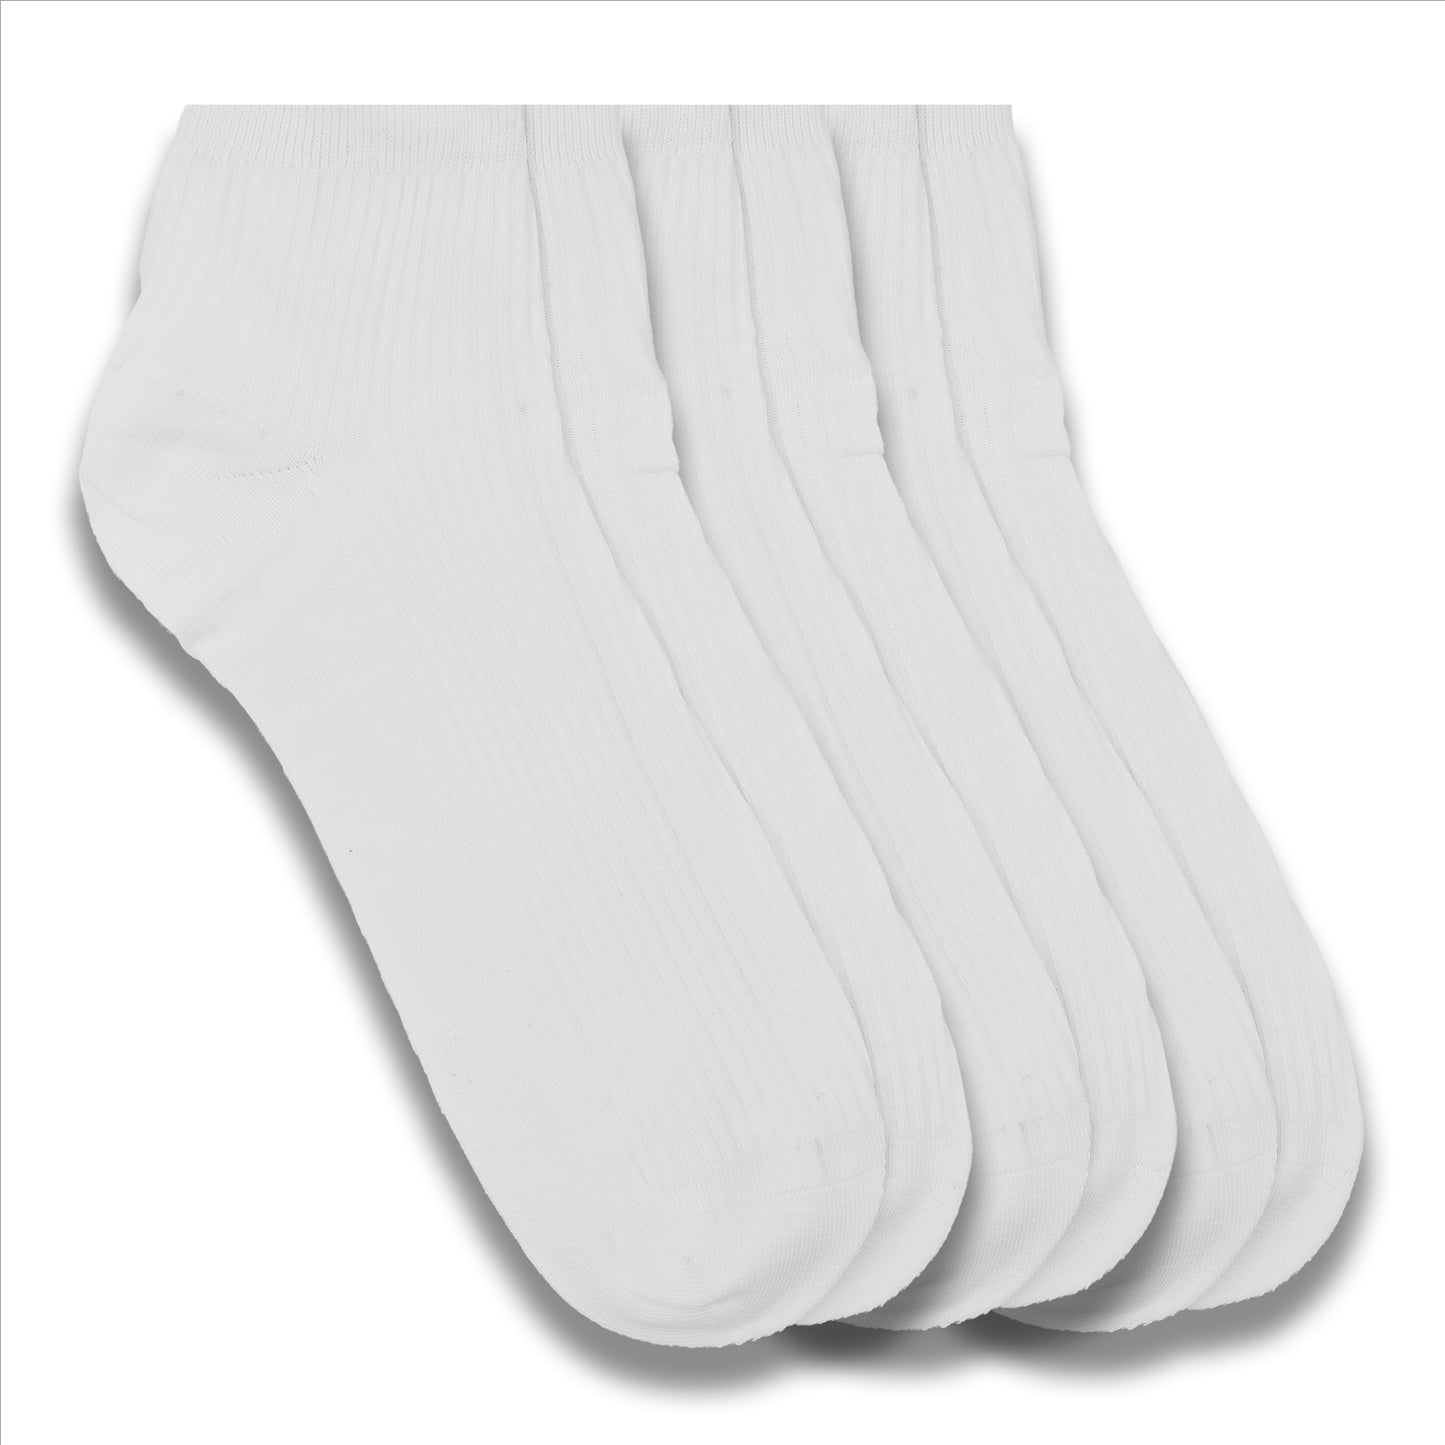 3-Pack Ladies Ribbed Queen Size Low Cut Socks